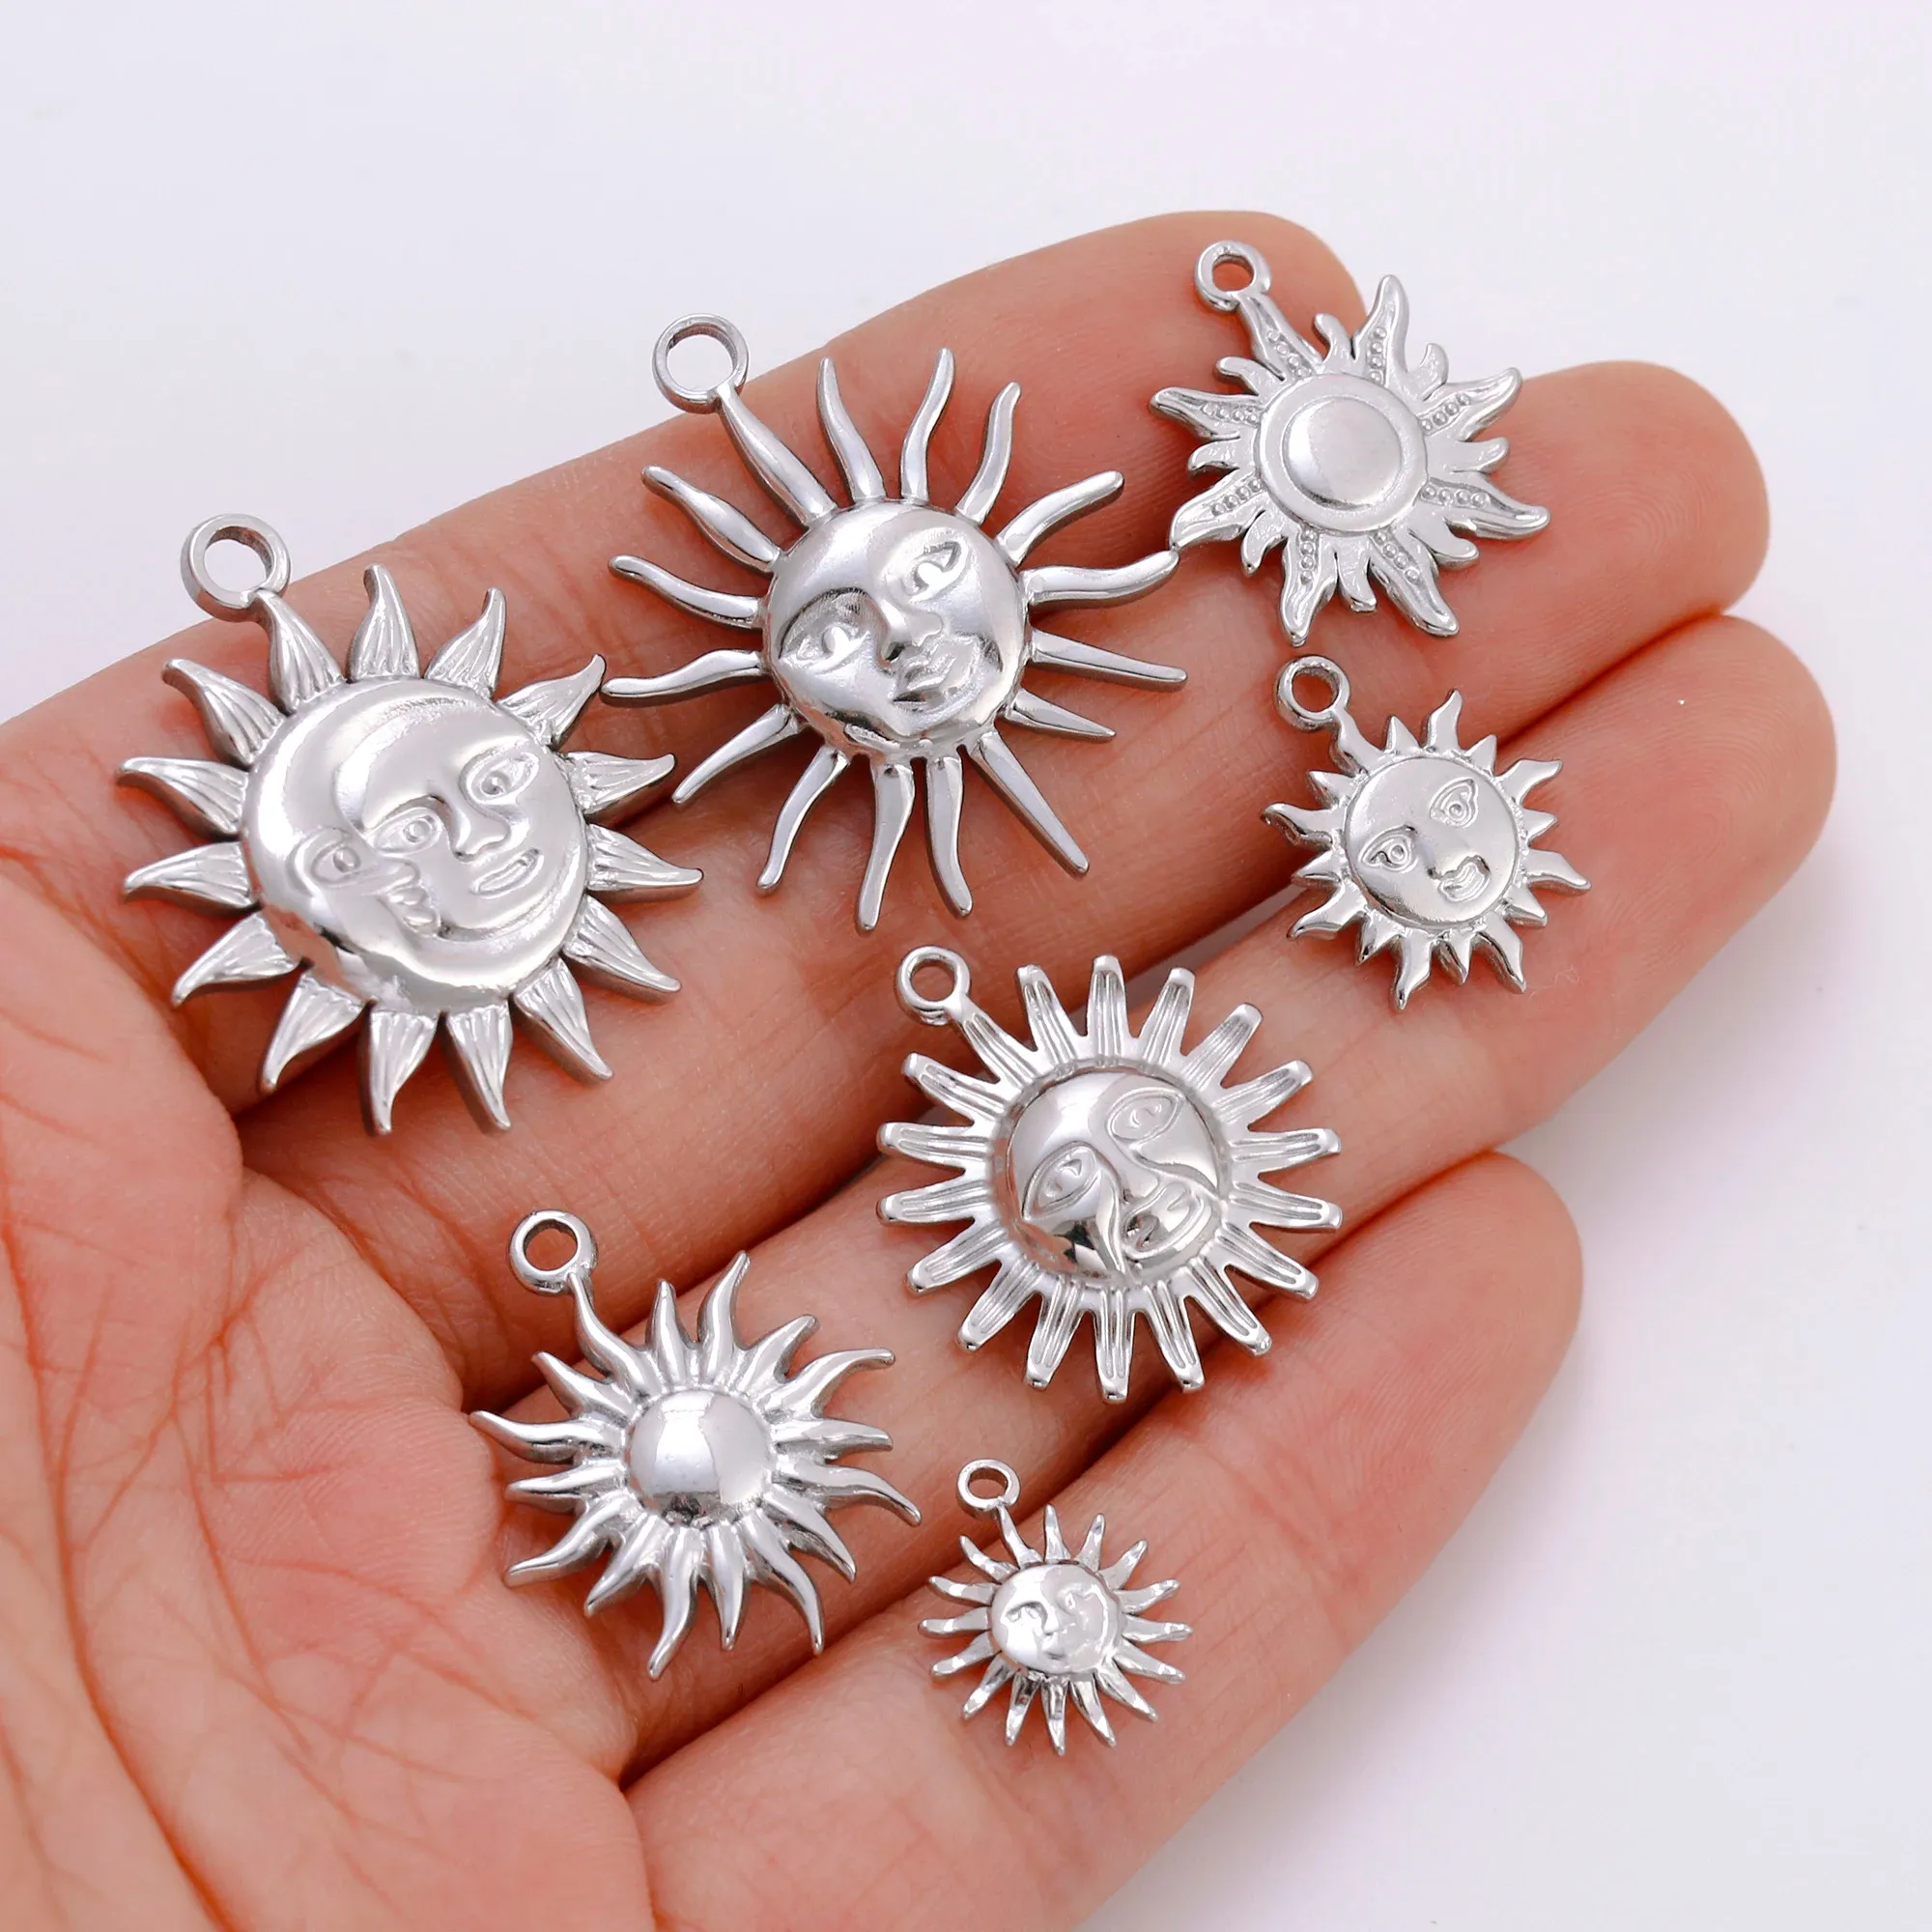 Hoyo Stainless Steel Casting Sun Moon Charms Sunburst Pendant Used Women Making Earrings Necklace Bracelet Jewelry Accessories